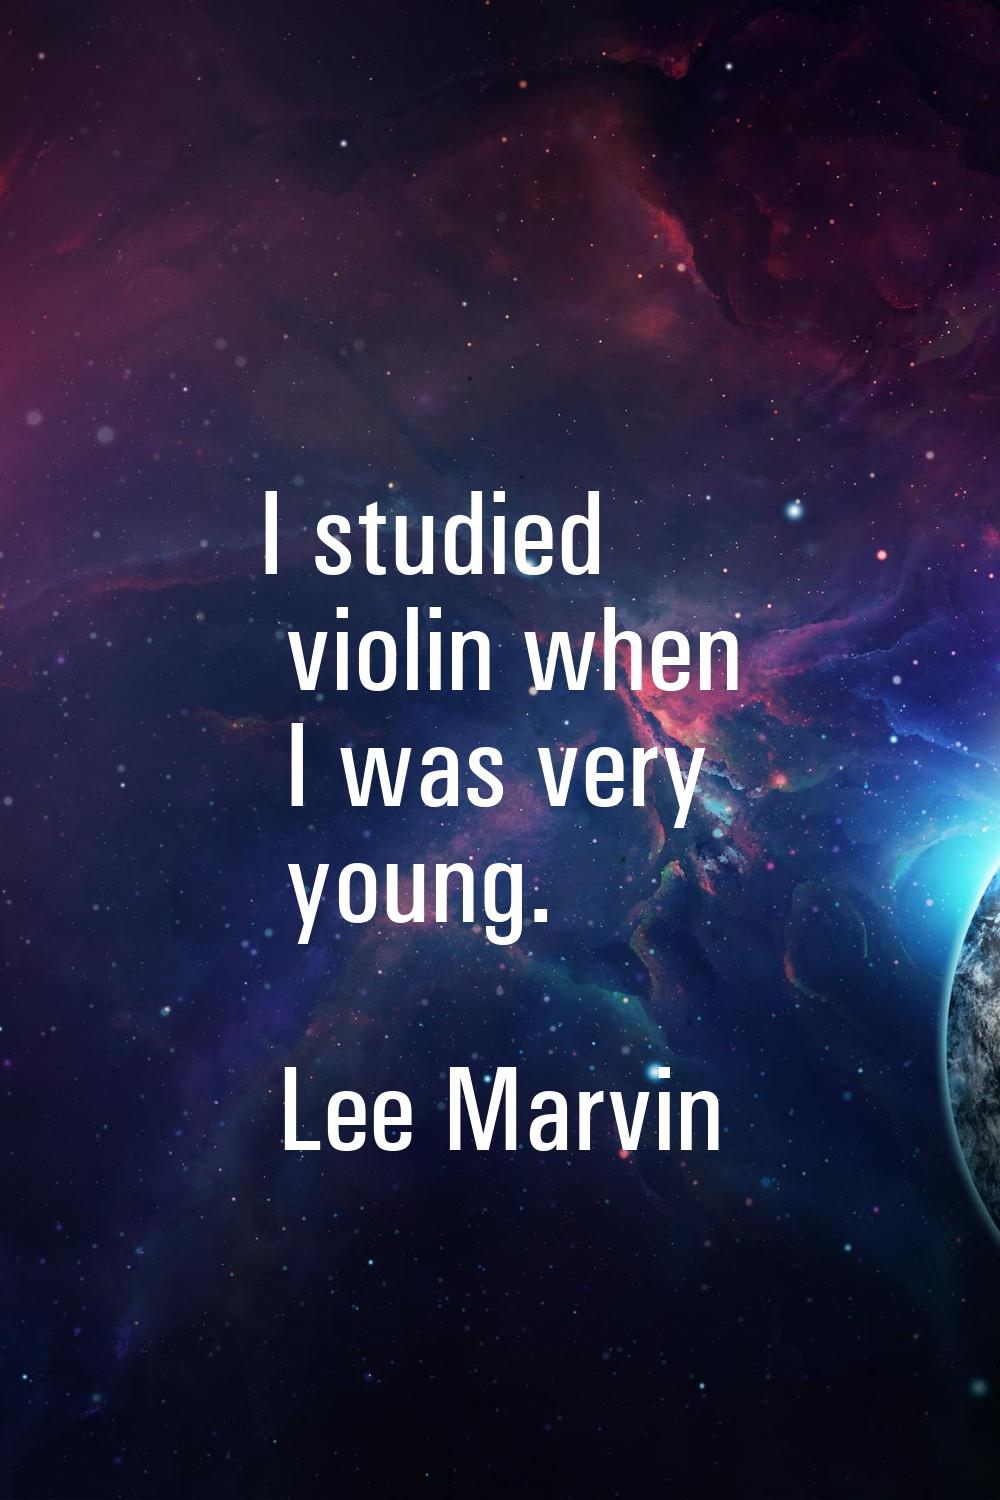 I studied violin when I was very young.